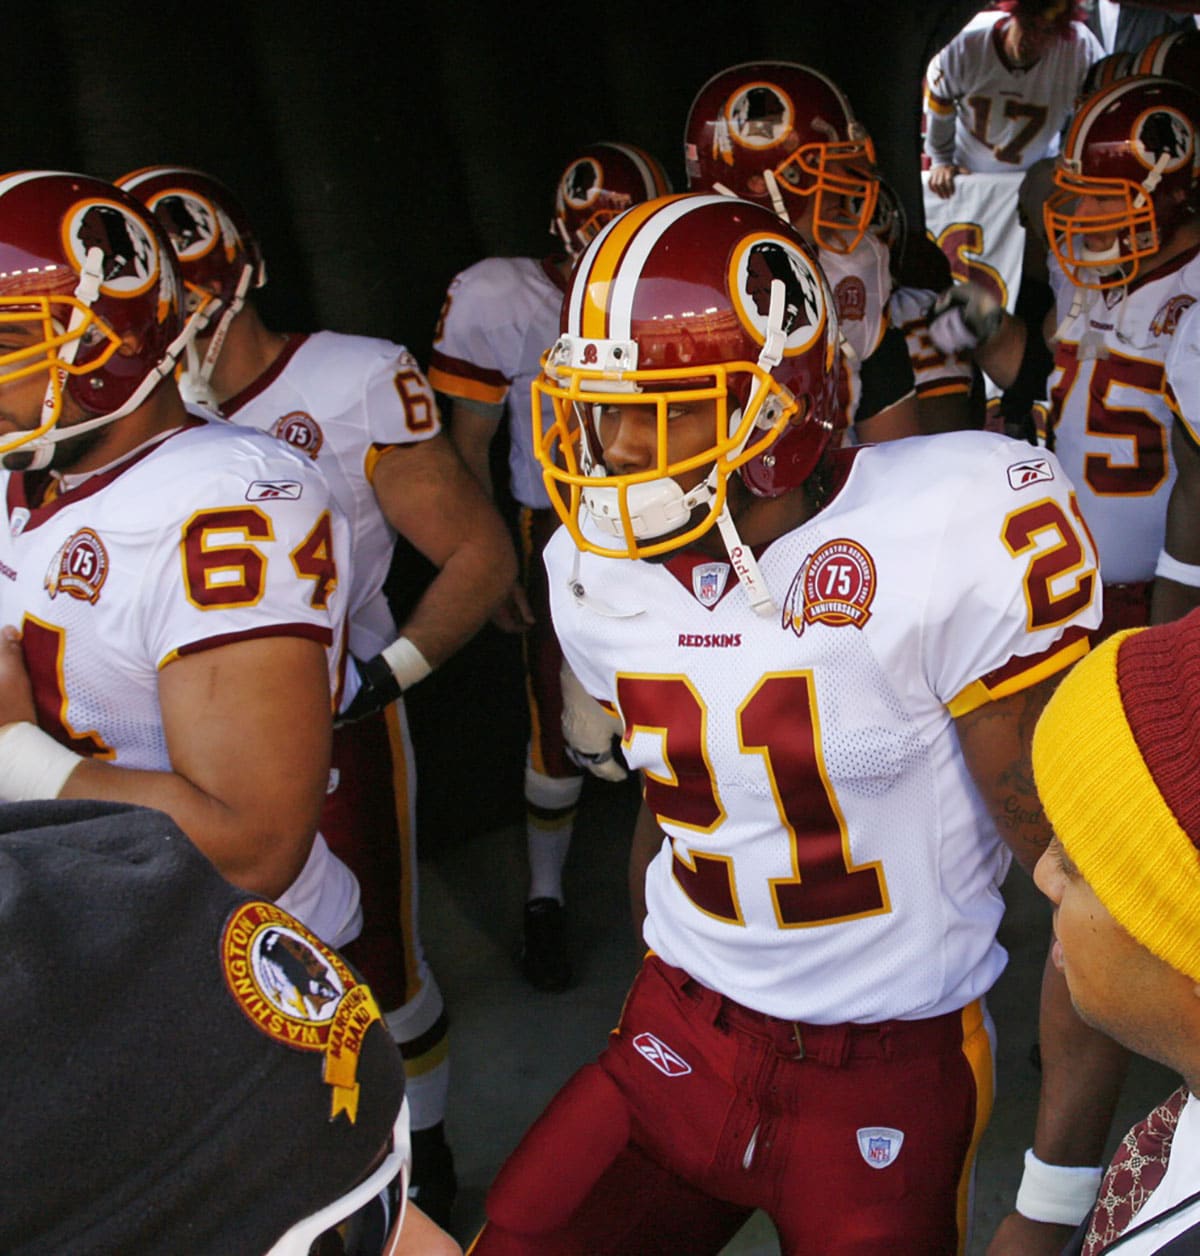 Washington Redskins safety Sean Taylor (21) and teammates prepare to take the field prior to the Redskins game against the Philadelphia Eagles at FedEx Field in Landover, MD.